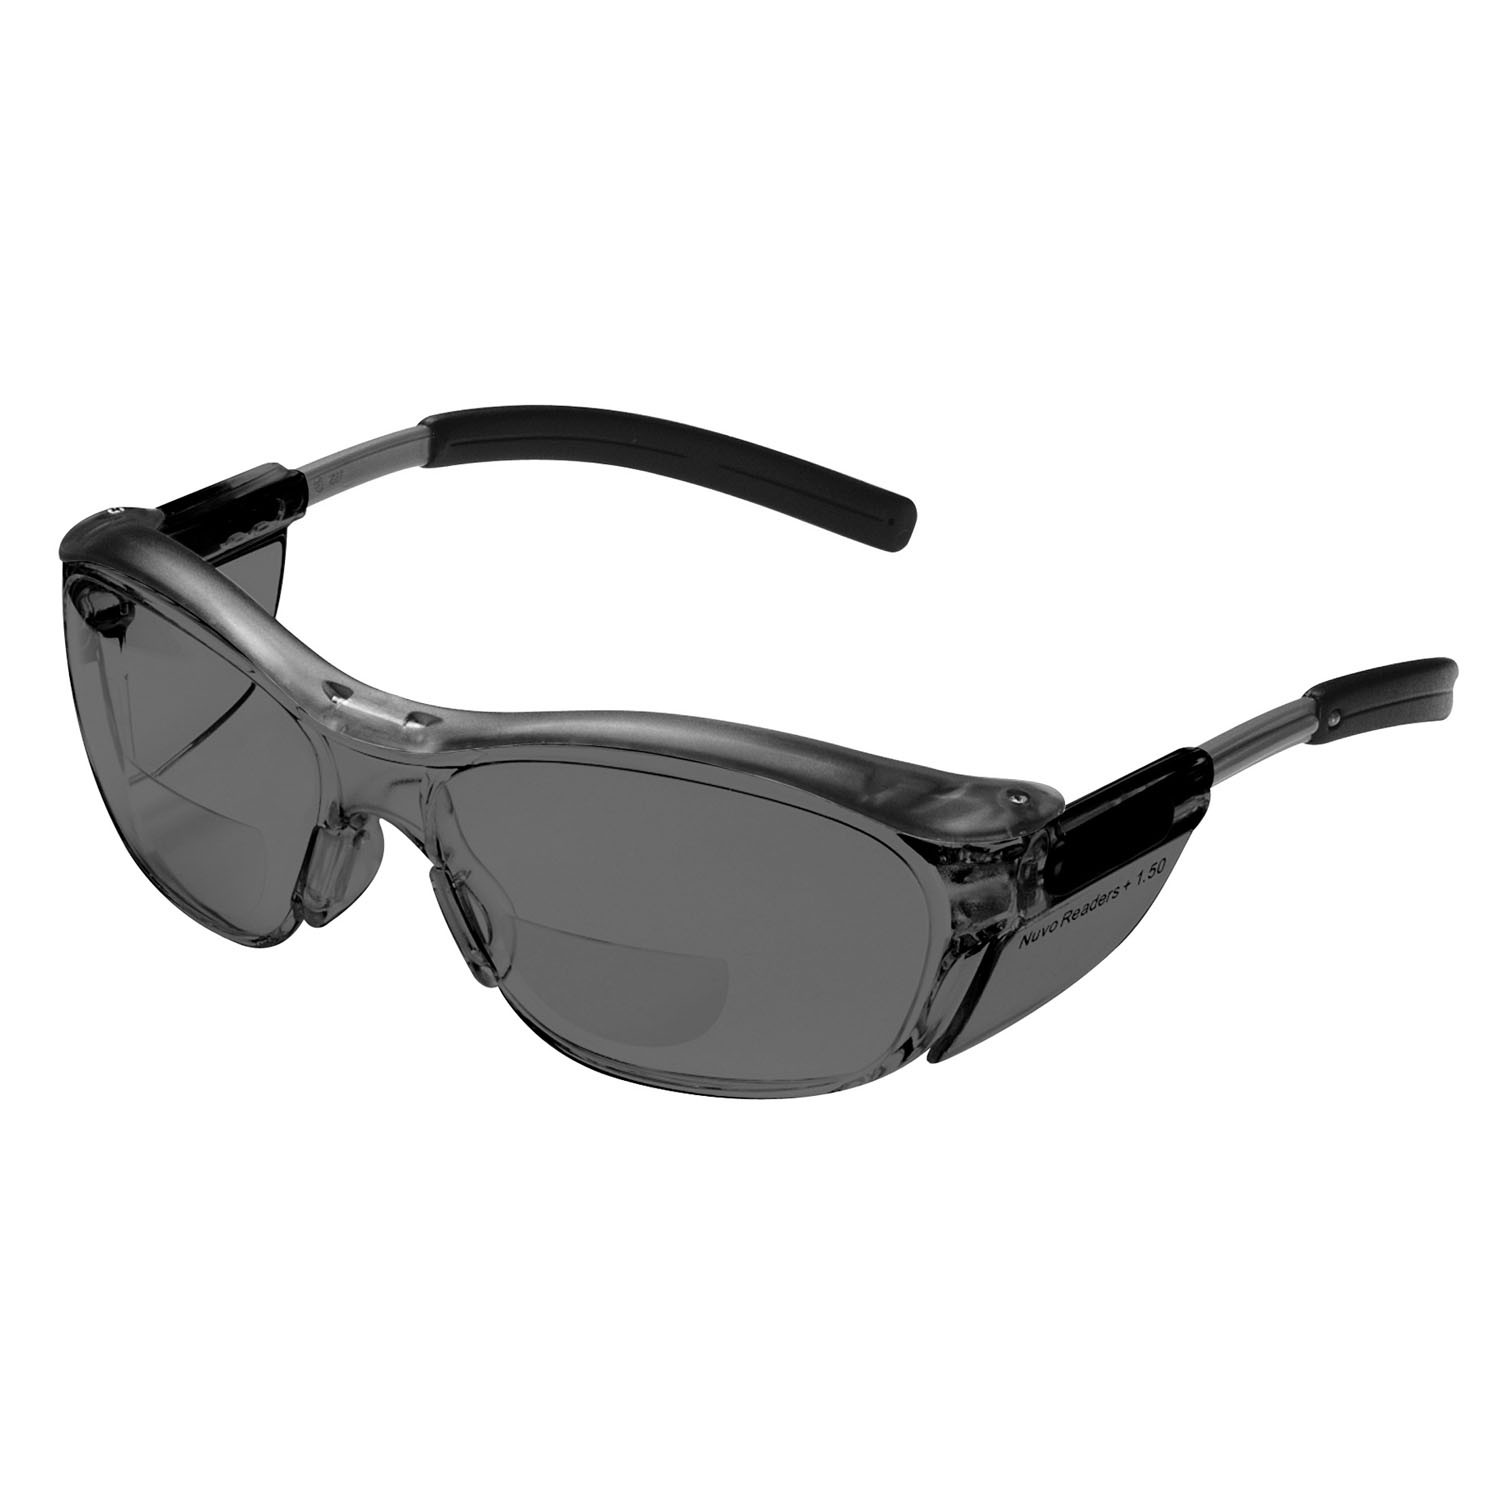 Nuvo Bifocal Safety Glasses Gray Lens